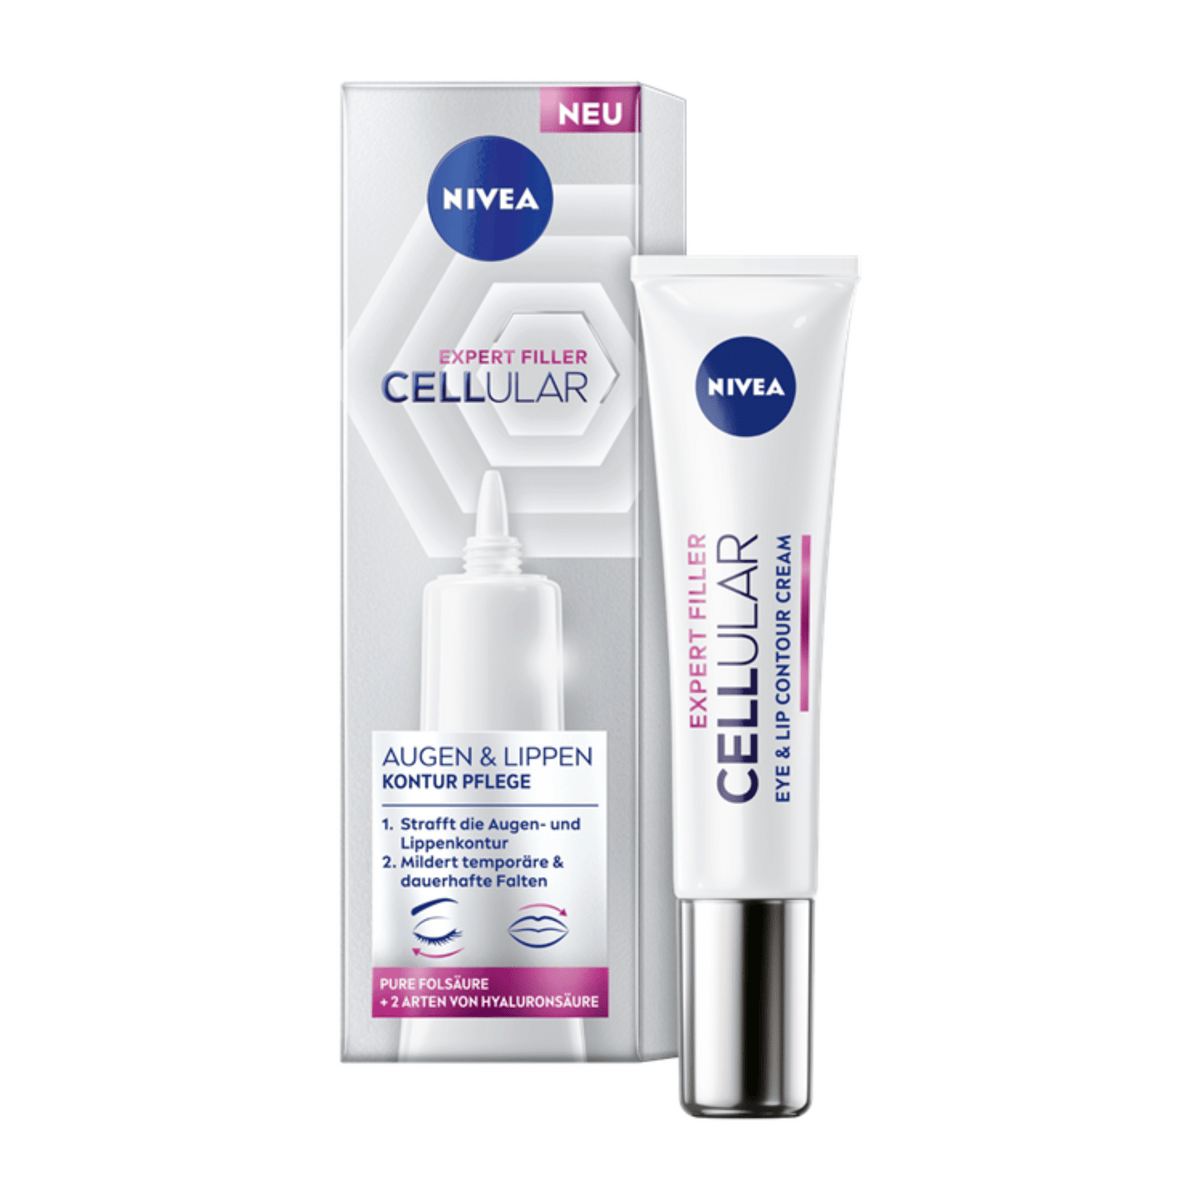 Primary Image of Cellular Expert Filler Eyes & Lips Contour Care